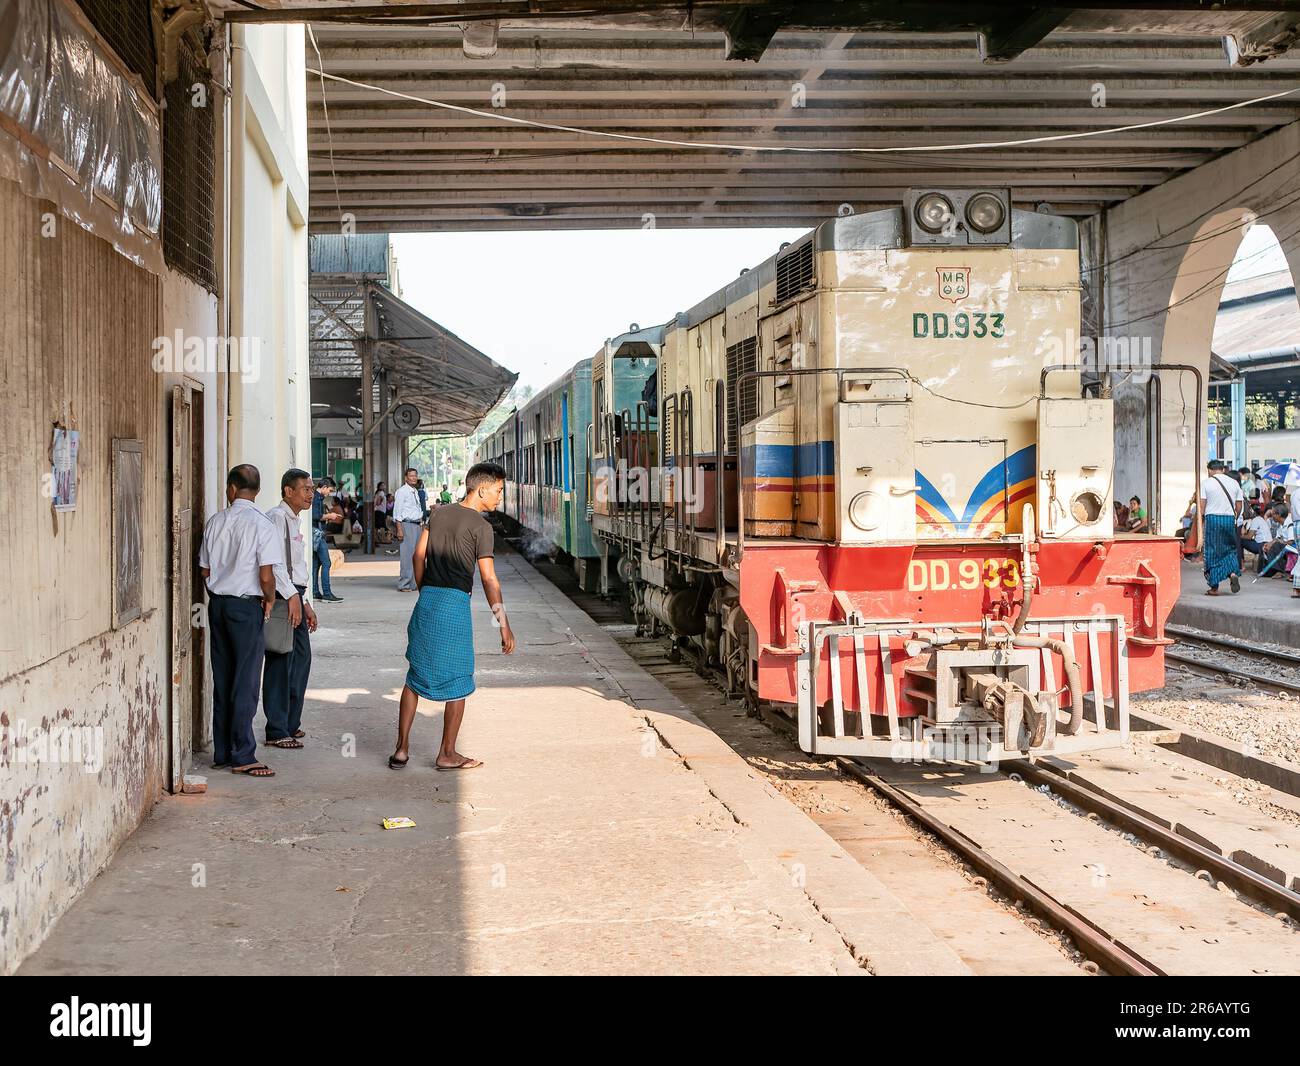 Passenger train with old diesel engine at Yangon Central, the main railway station in Yangon, Myanmar. Stock Photo